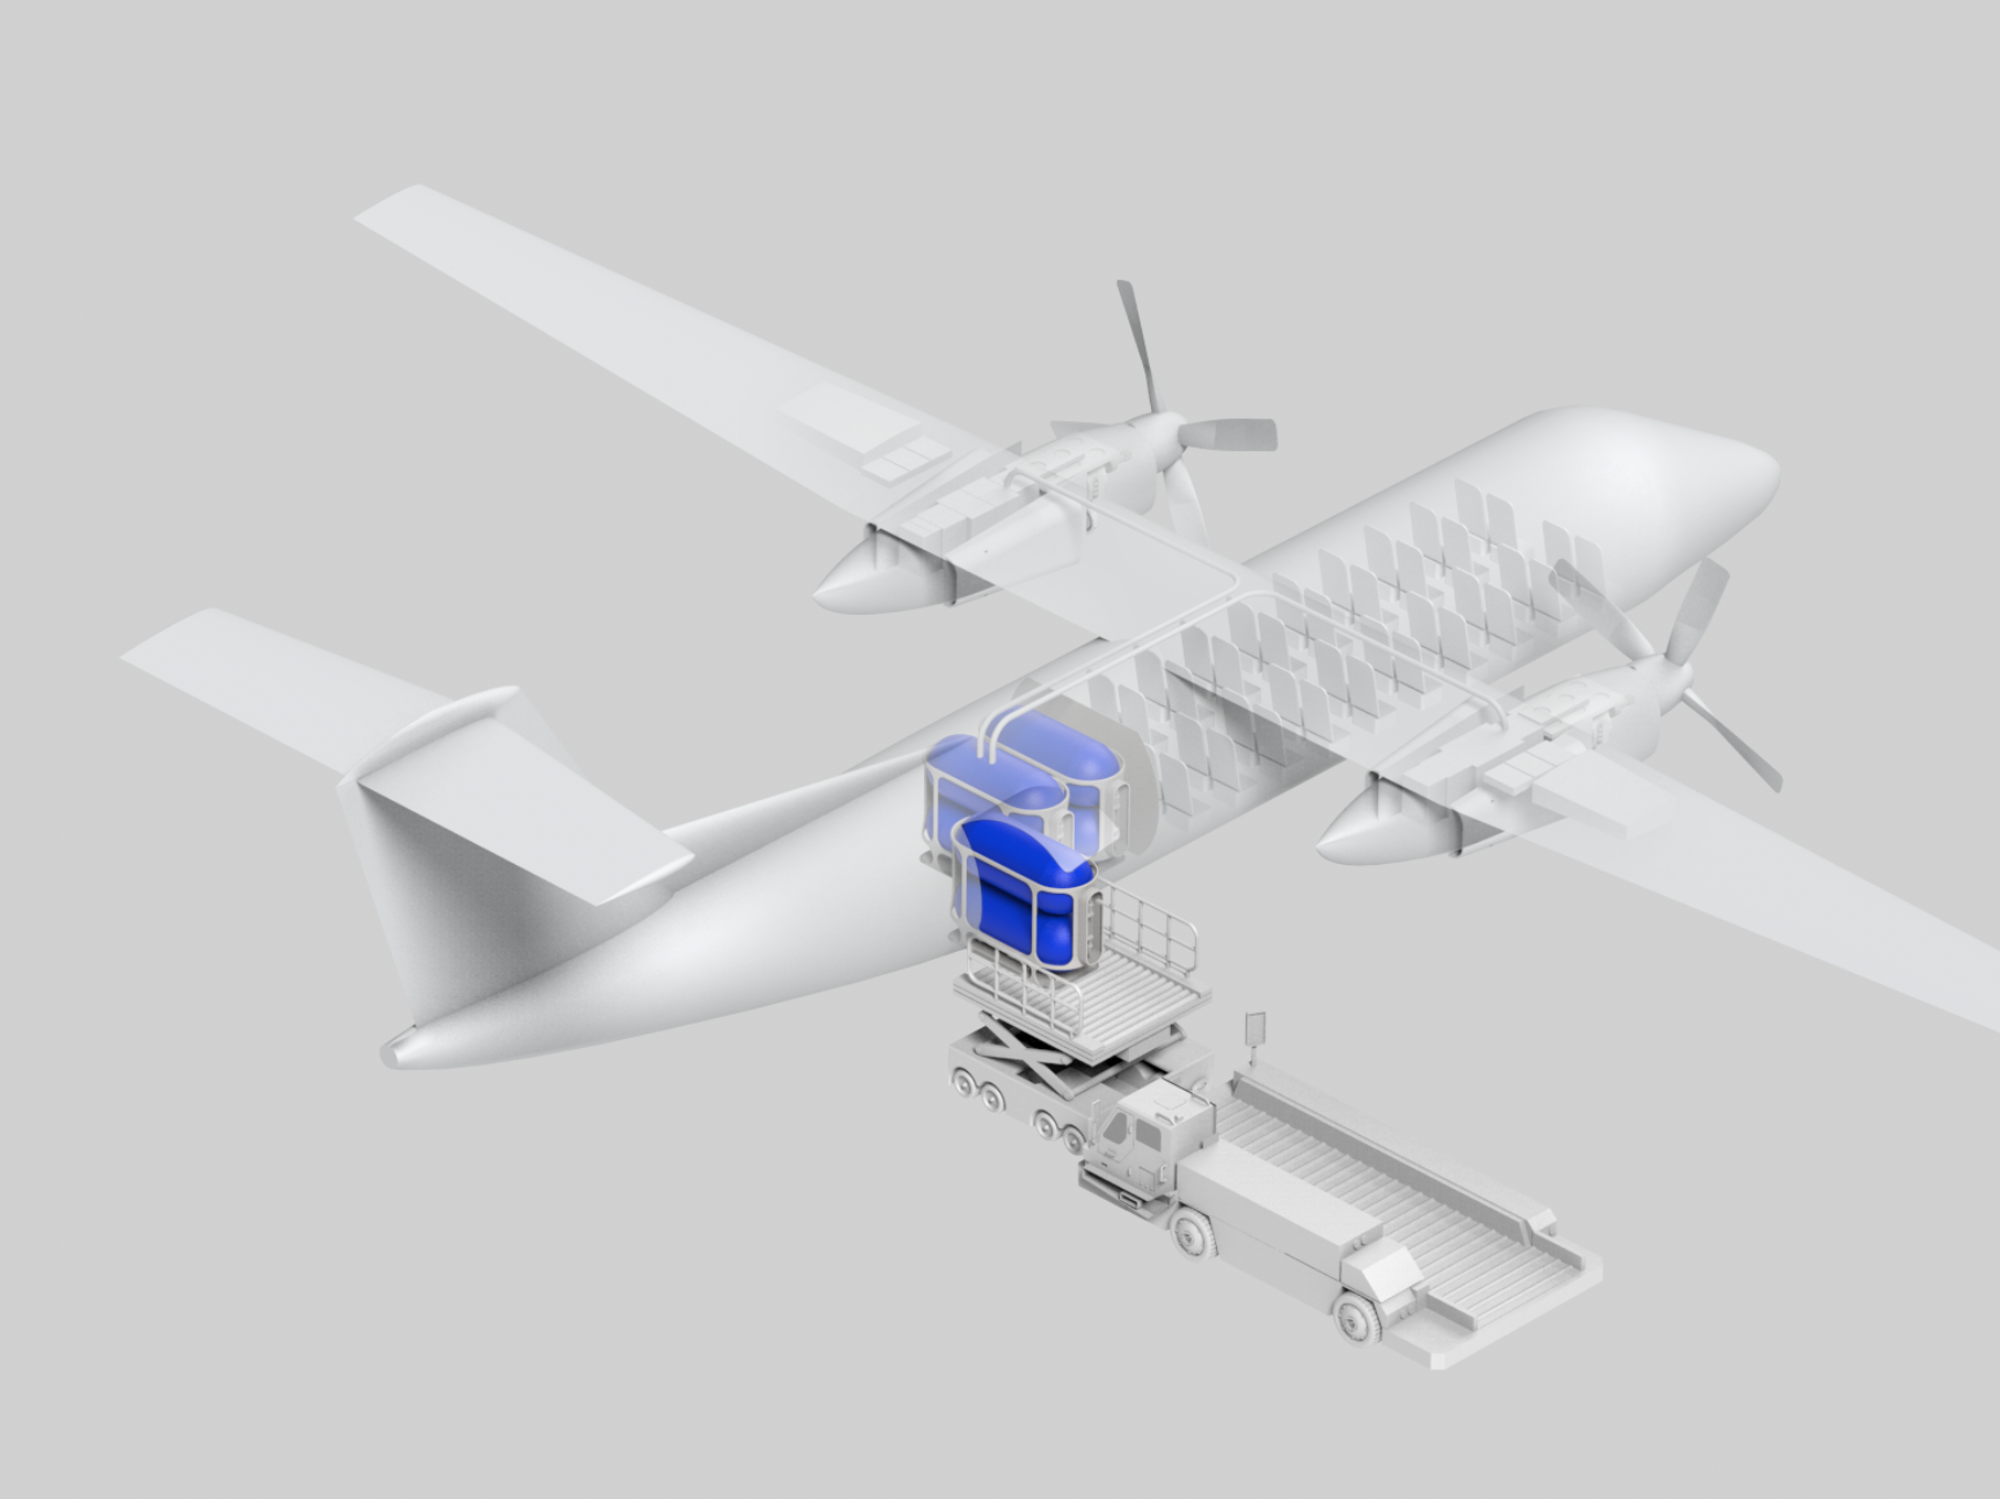 Can Hydrogen Replace Fossil Fuels in the Sky? This Startup Is Converting One Plane at a Time.